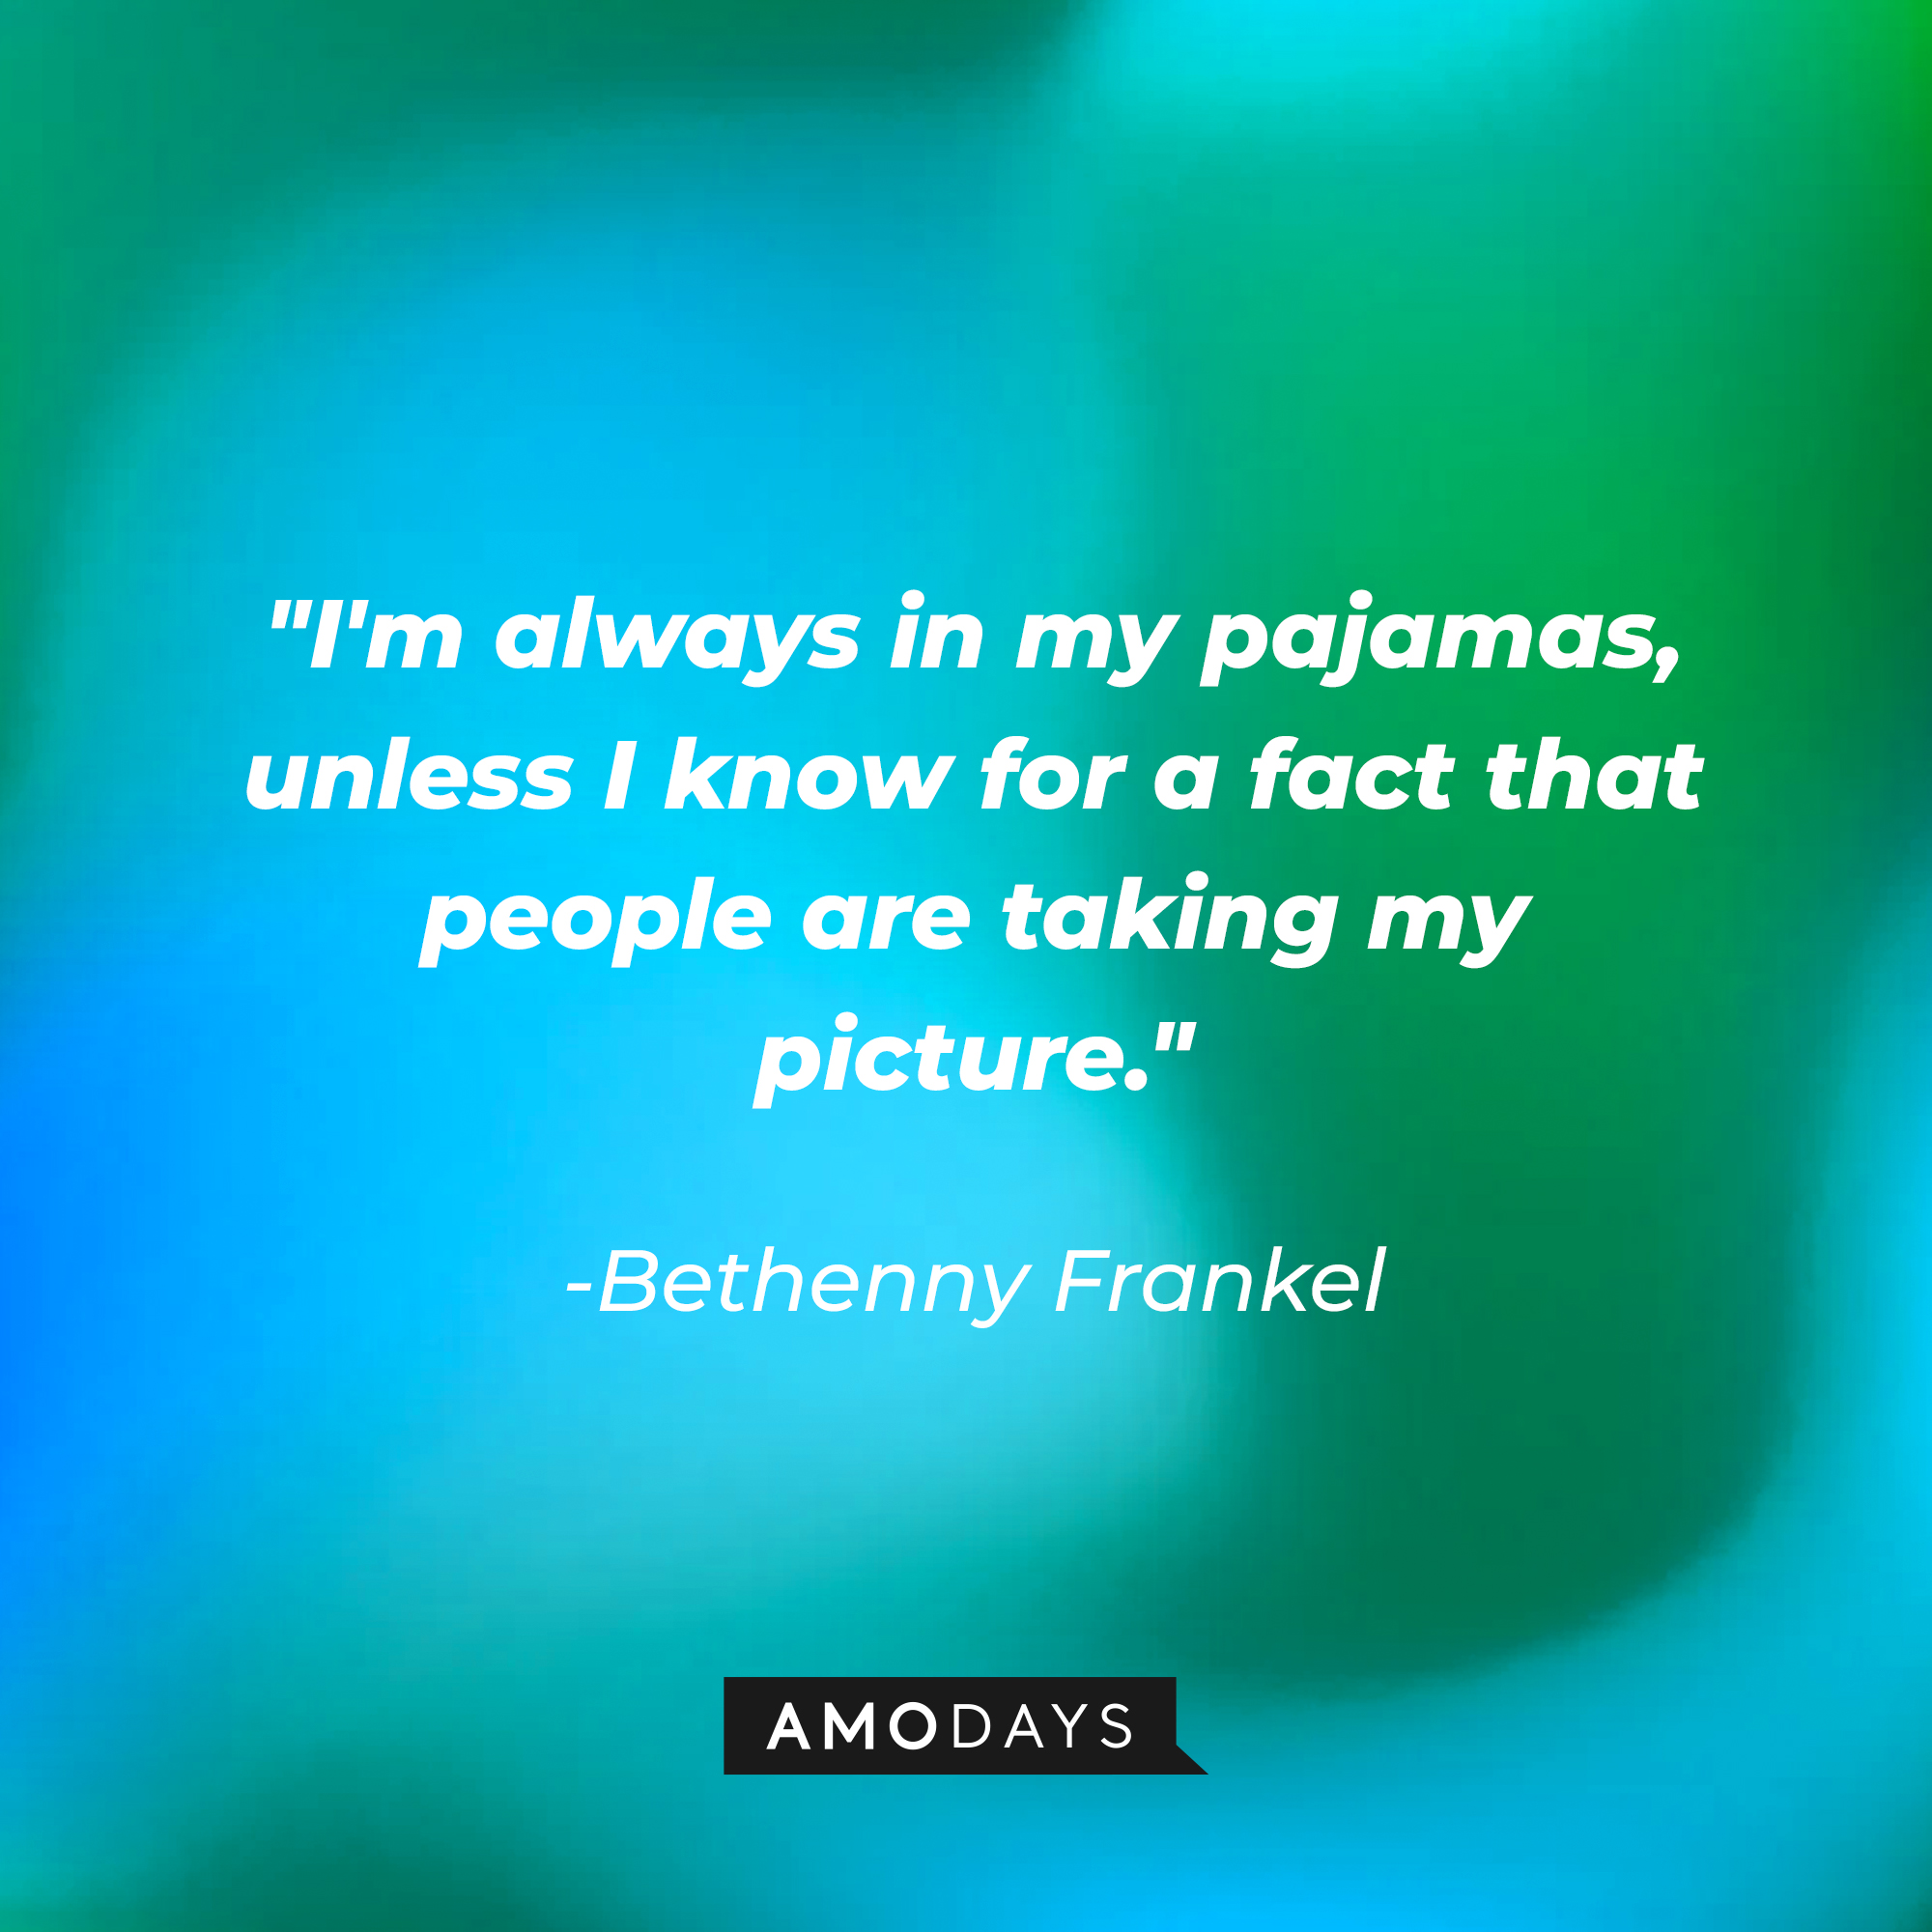 Bethenny Frankel's quote: “I'm always in my pajamas, unless I know for a fact that people are taking my picture.” | Source: Amodays